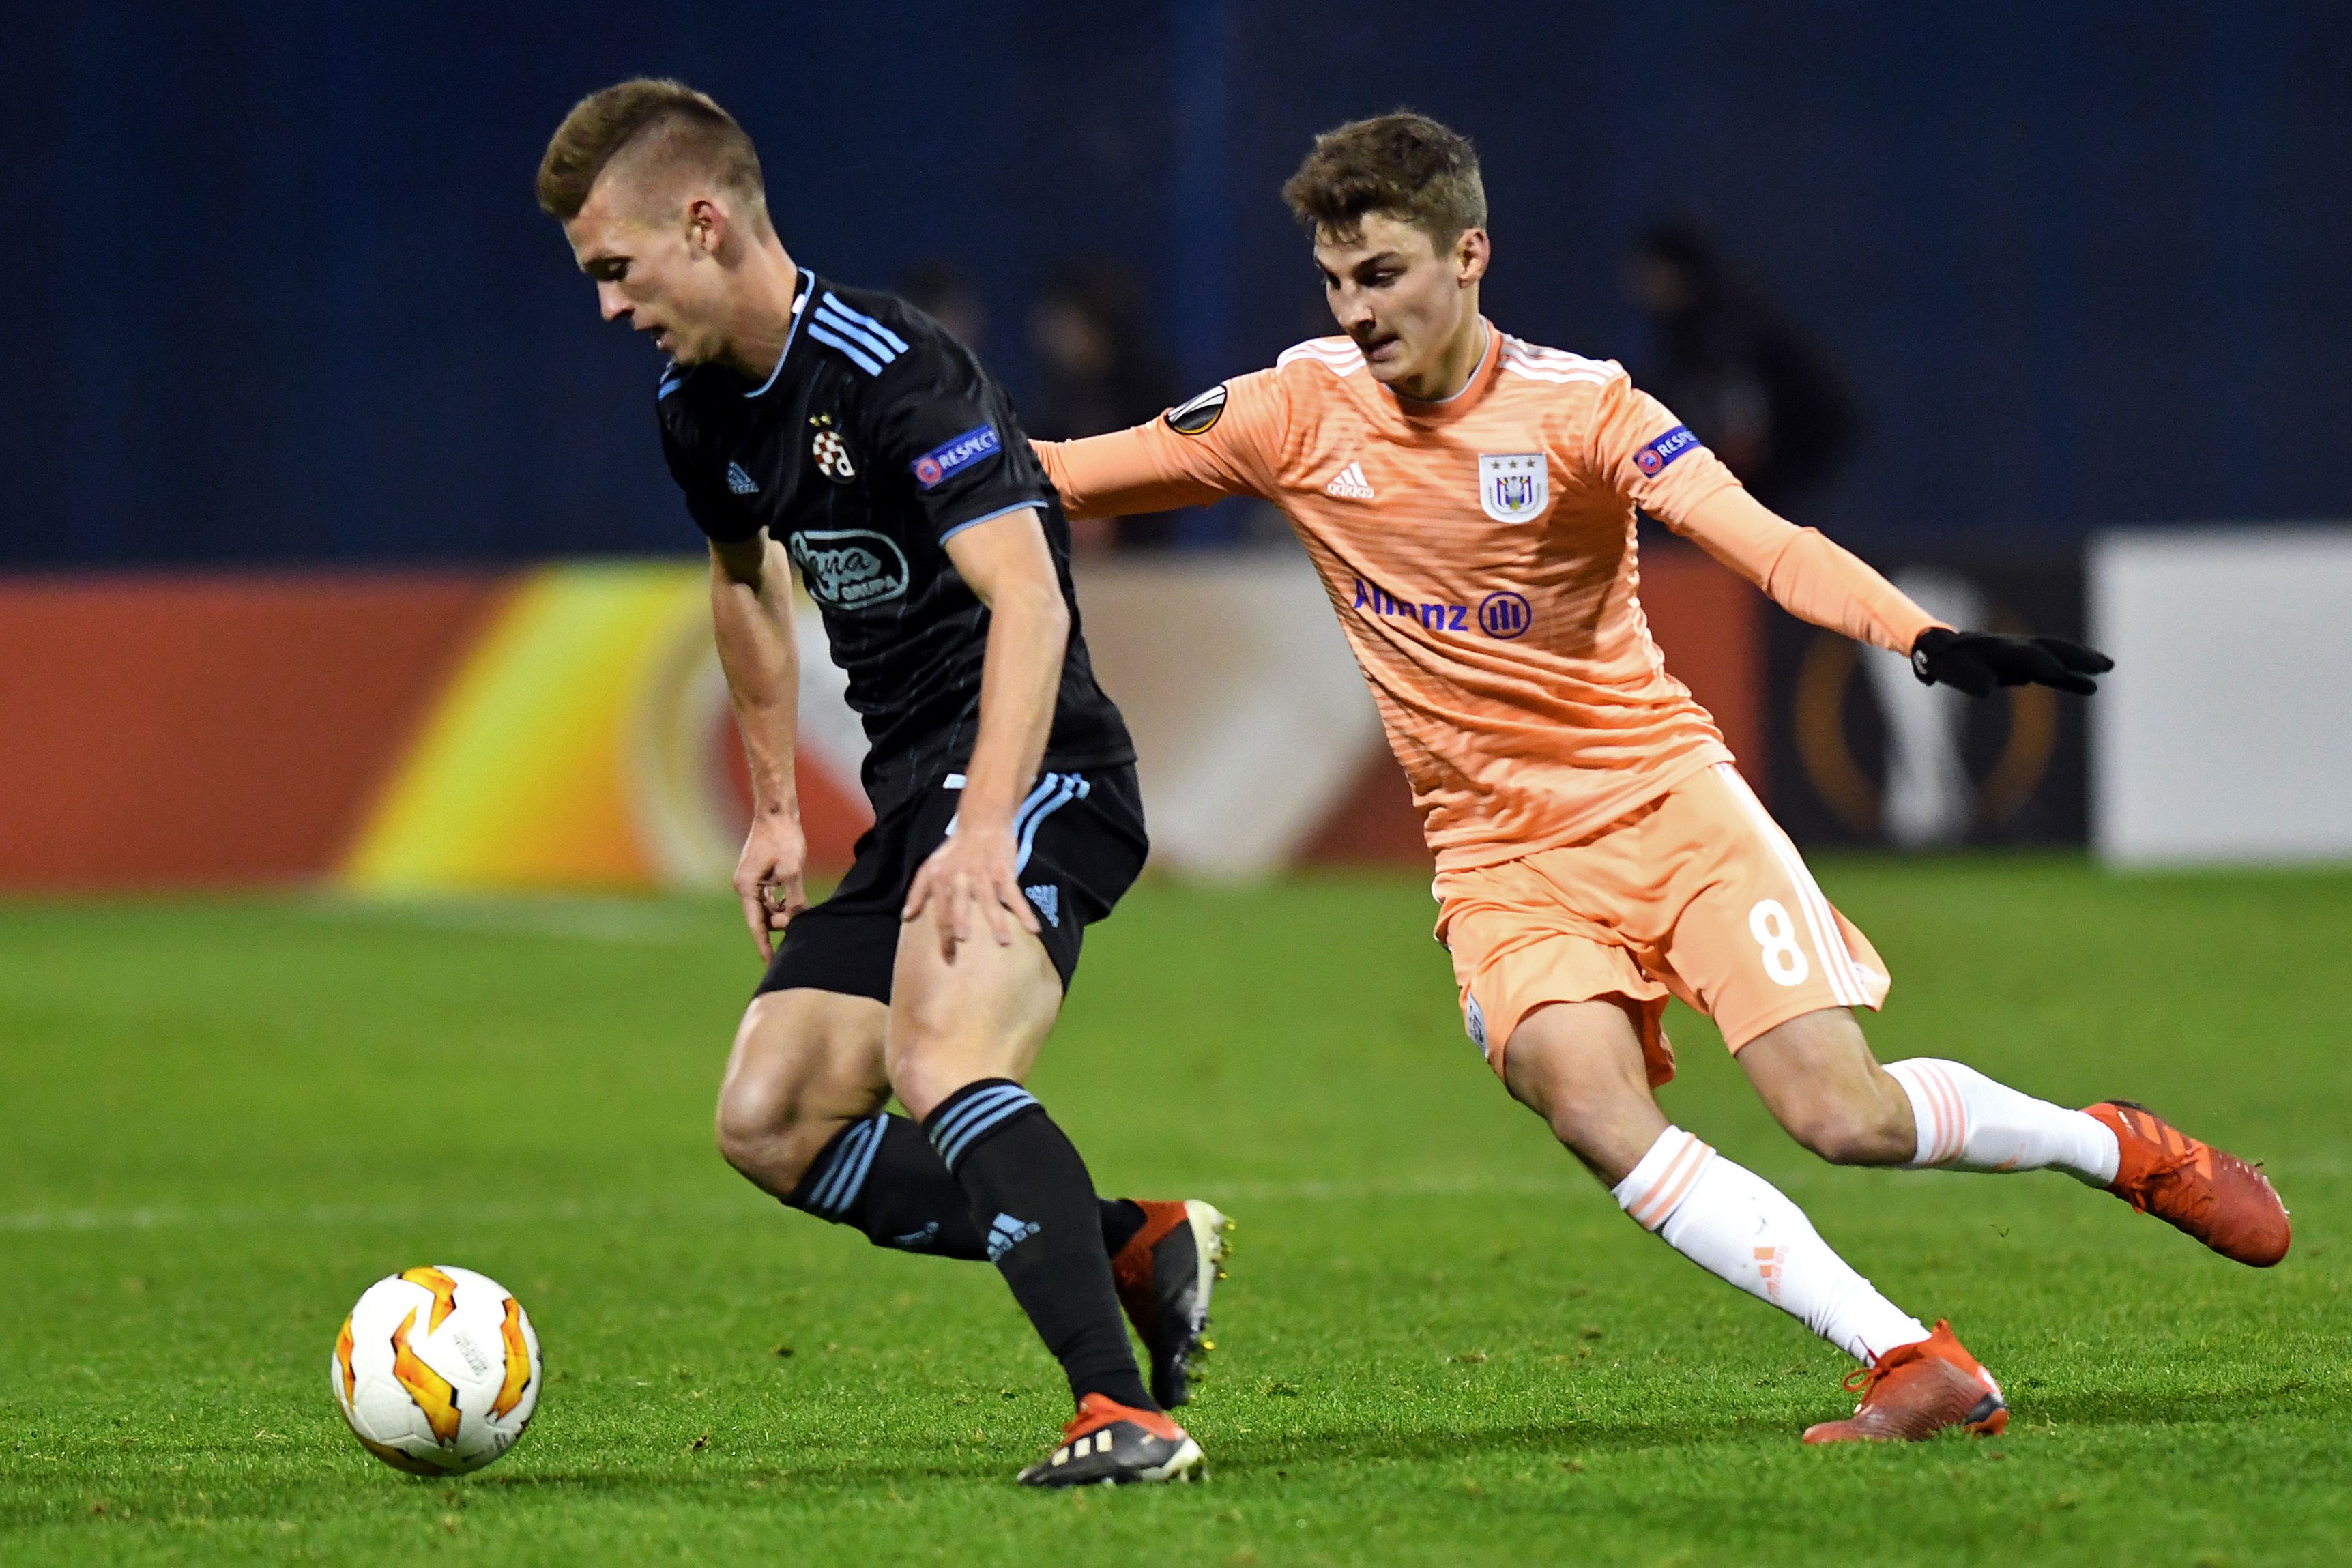 Dinamo Zagreb's Spanish midfielder Dani Olmo (L) vies with Anderlecht's Belgian midfielder Pieter Gerkens during the UEFA Europa League Group D football match between GNK Dinamo Zagreb and RSC Anderlecht at the Maksimir stadium in Zagreb on December 13, 2018. (Photo by Denis LOVROVIC / AFP)        (Photo credit should read DENIS LOVROVIC/AFP/Getty Images)